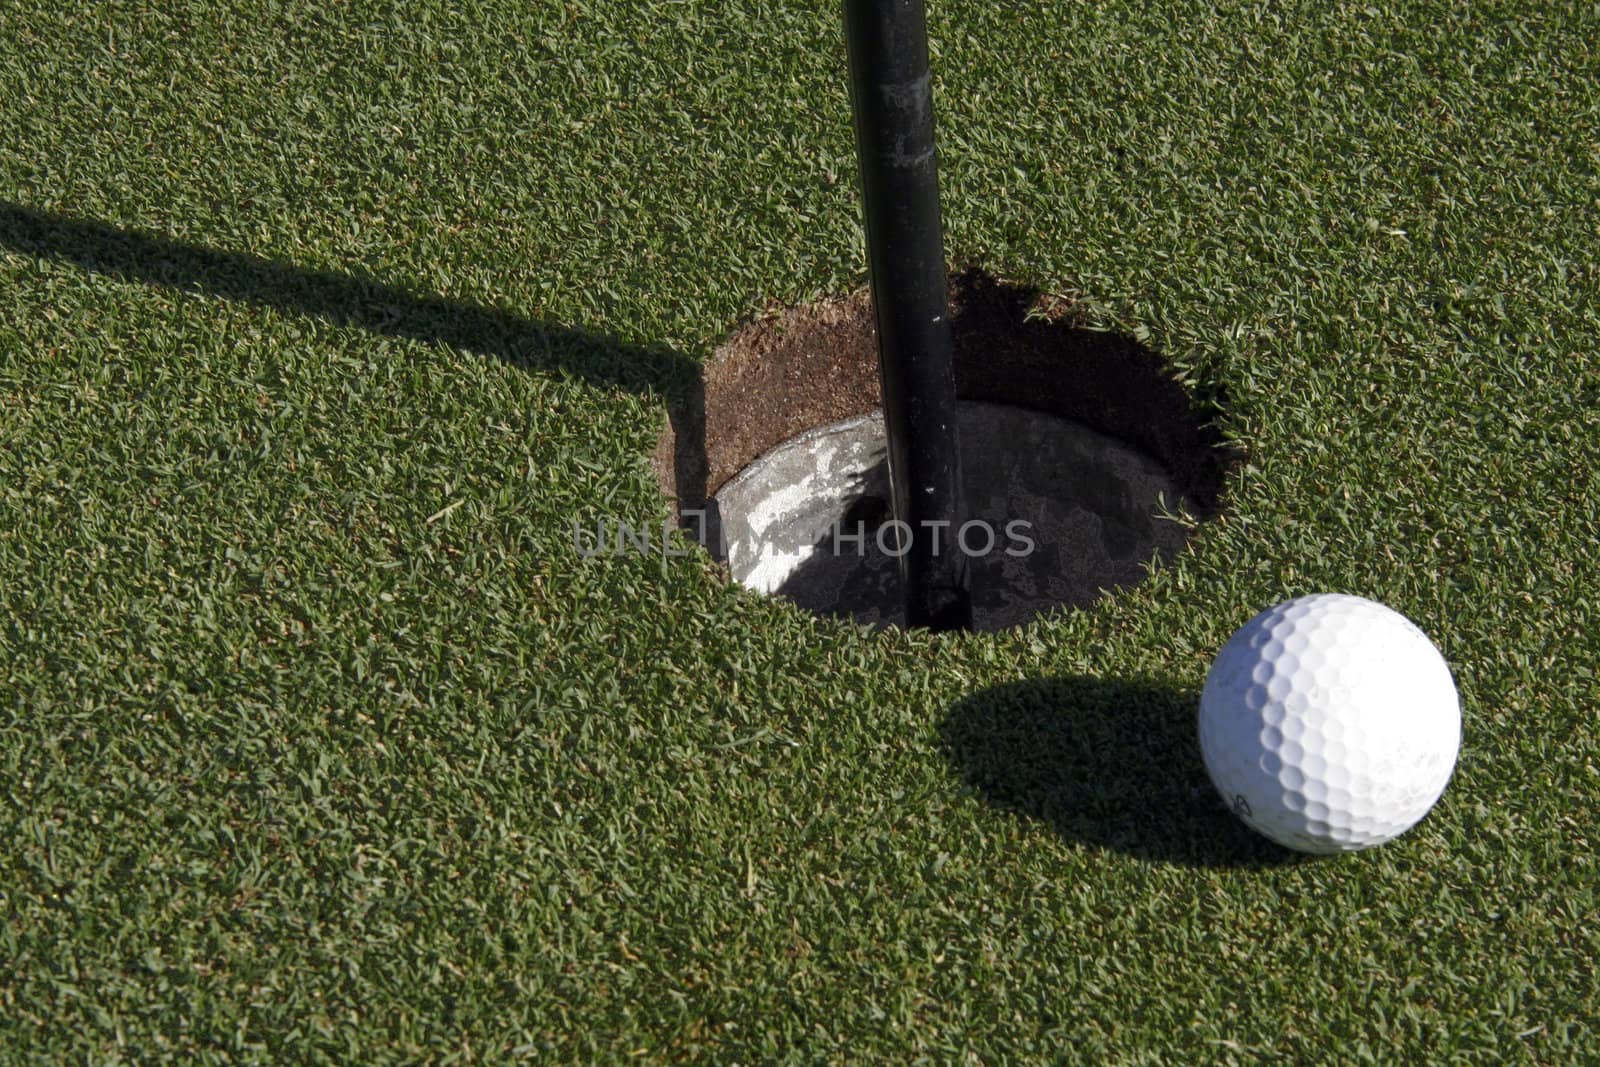 White Small Golf Ball Next To The Hole On The Green